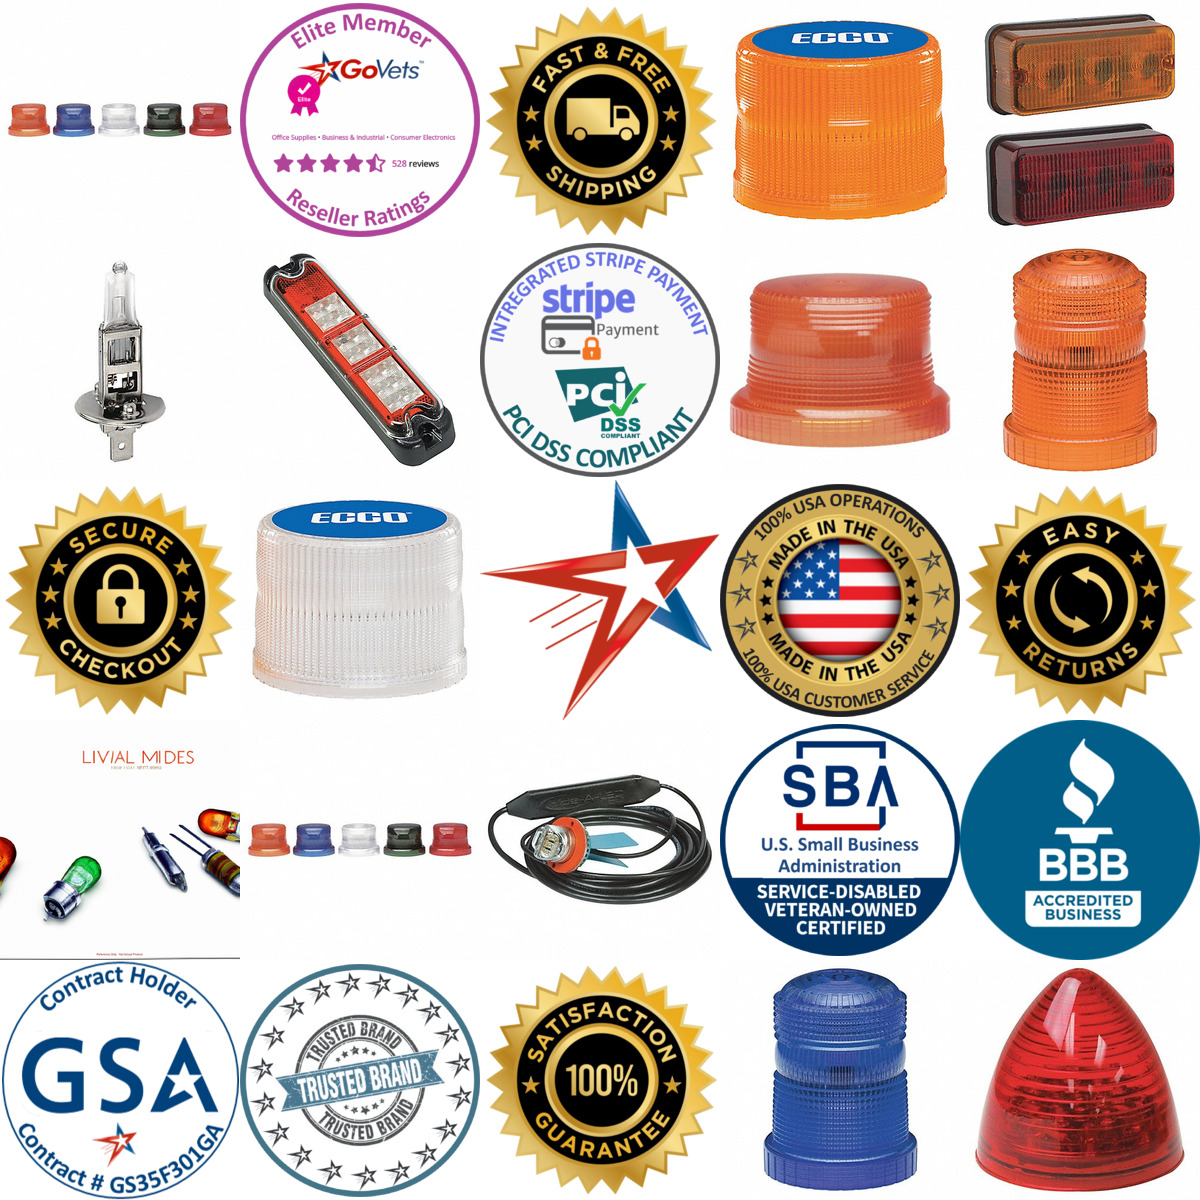 A selection of Automotive Lamps and Bulbs products on GoVets